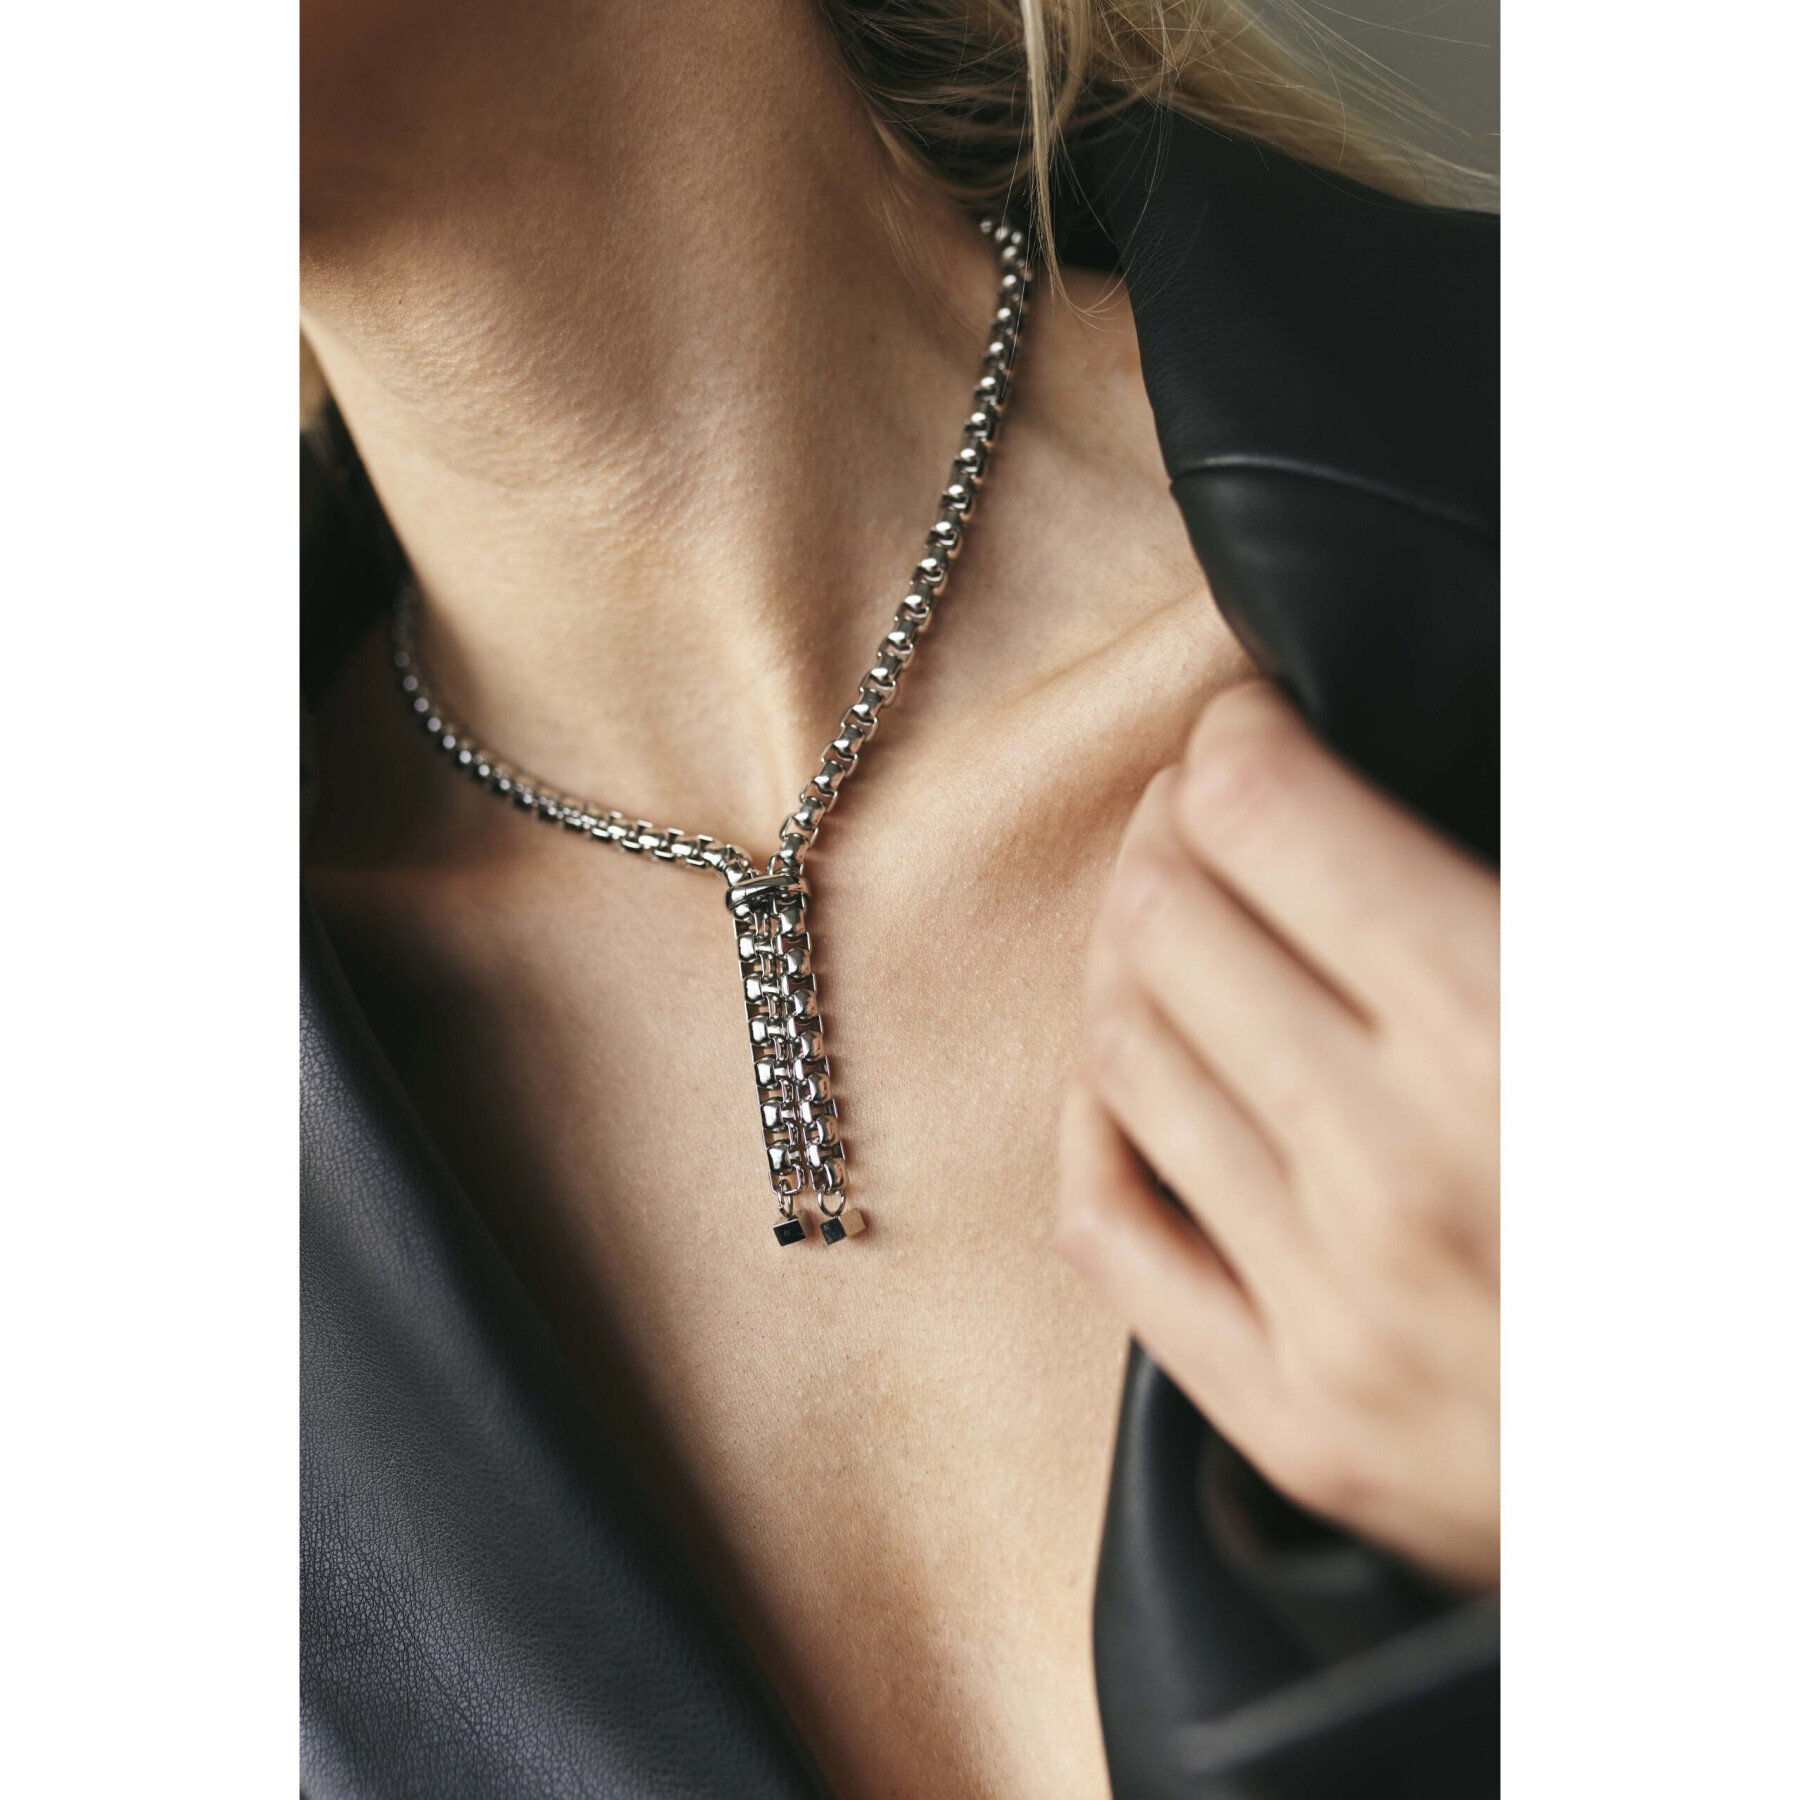 Women's necklace Isabella Ford Paula